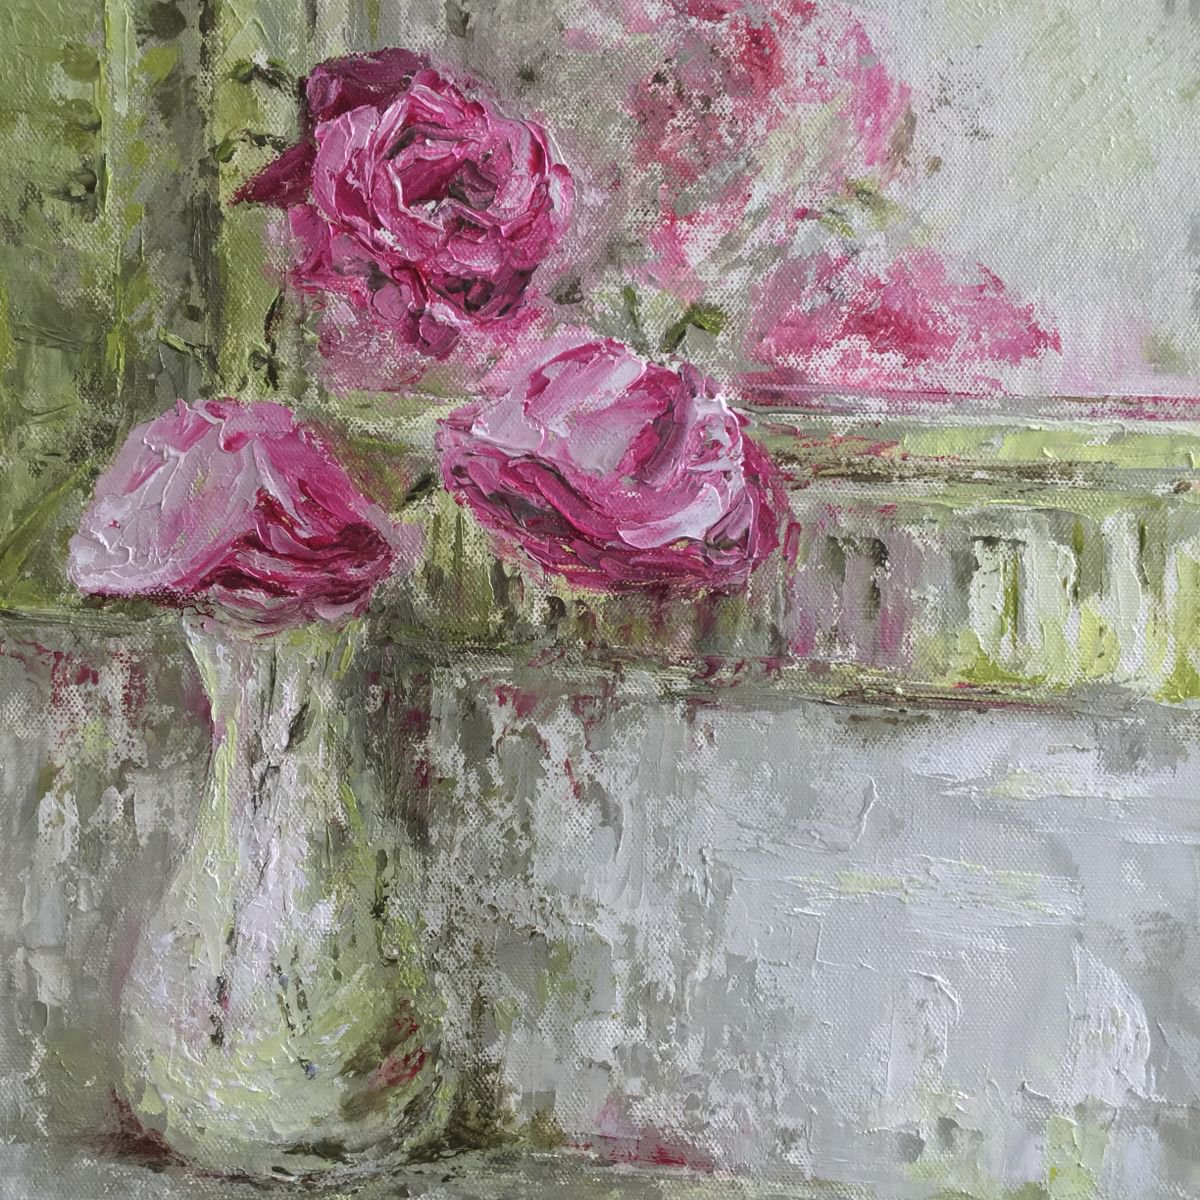 Time Goes Away Impressionist Flowers / Still Life by Rebecca Pells